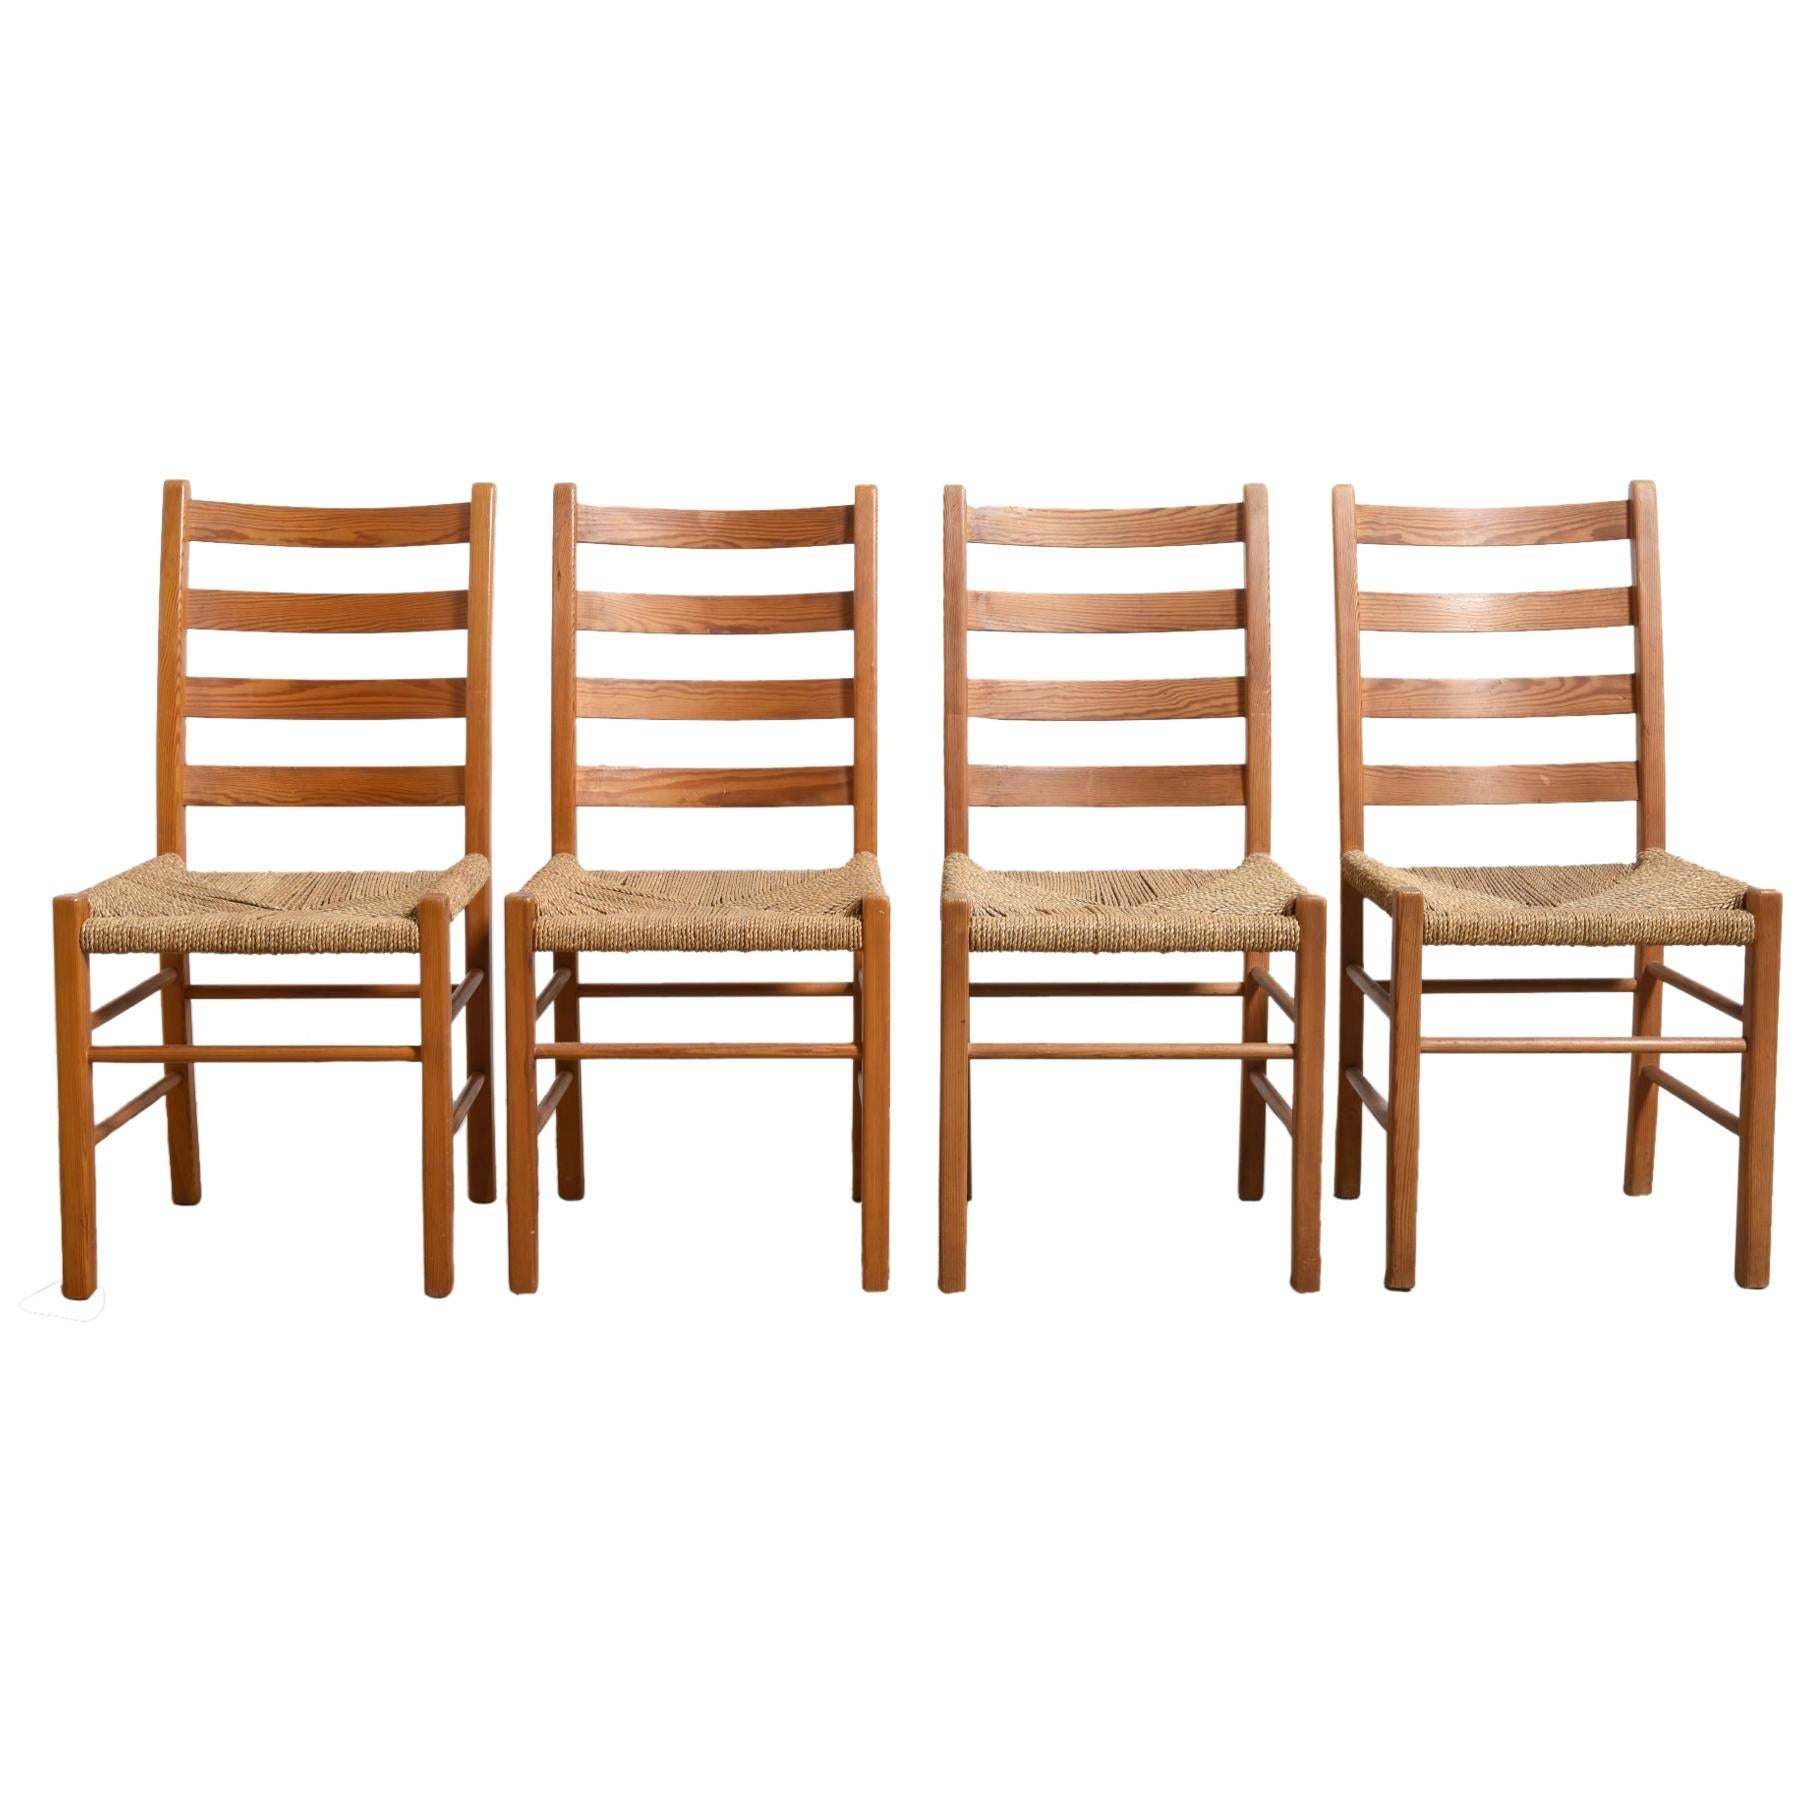 Set of Four Solid Pinewood Chairs with Rush Seat, 1950s